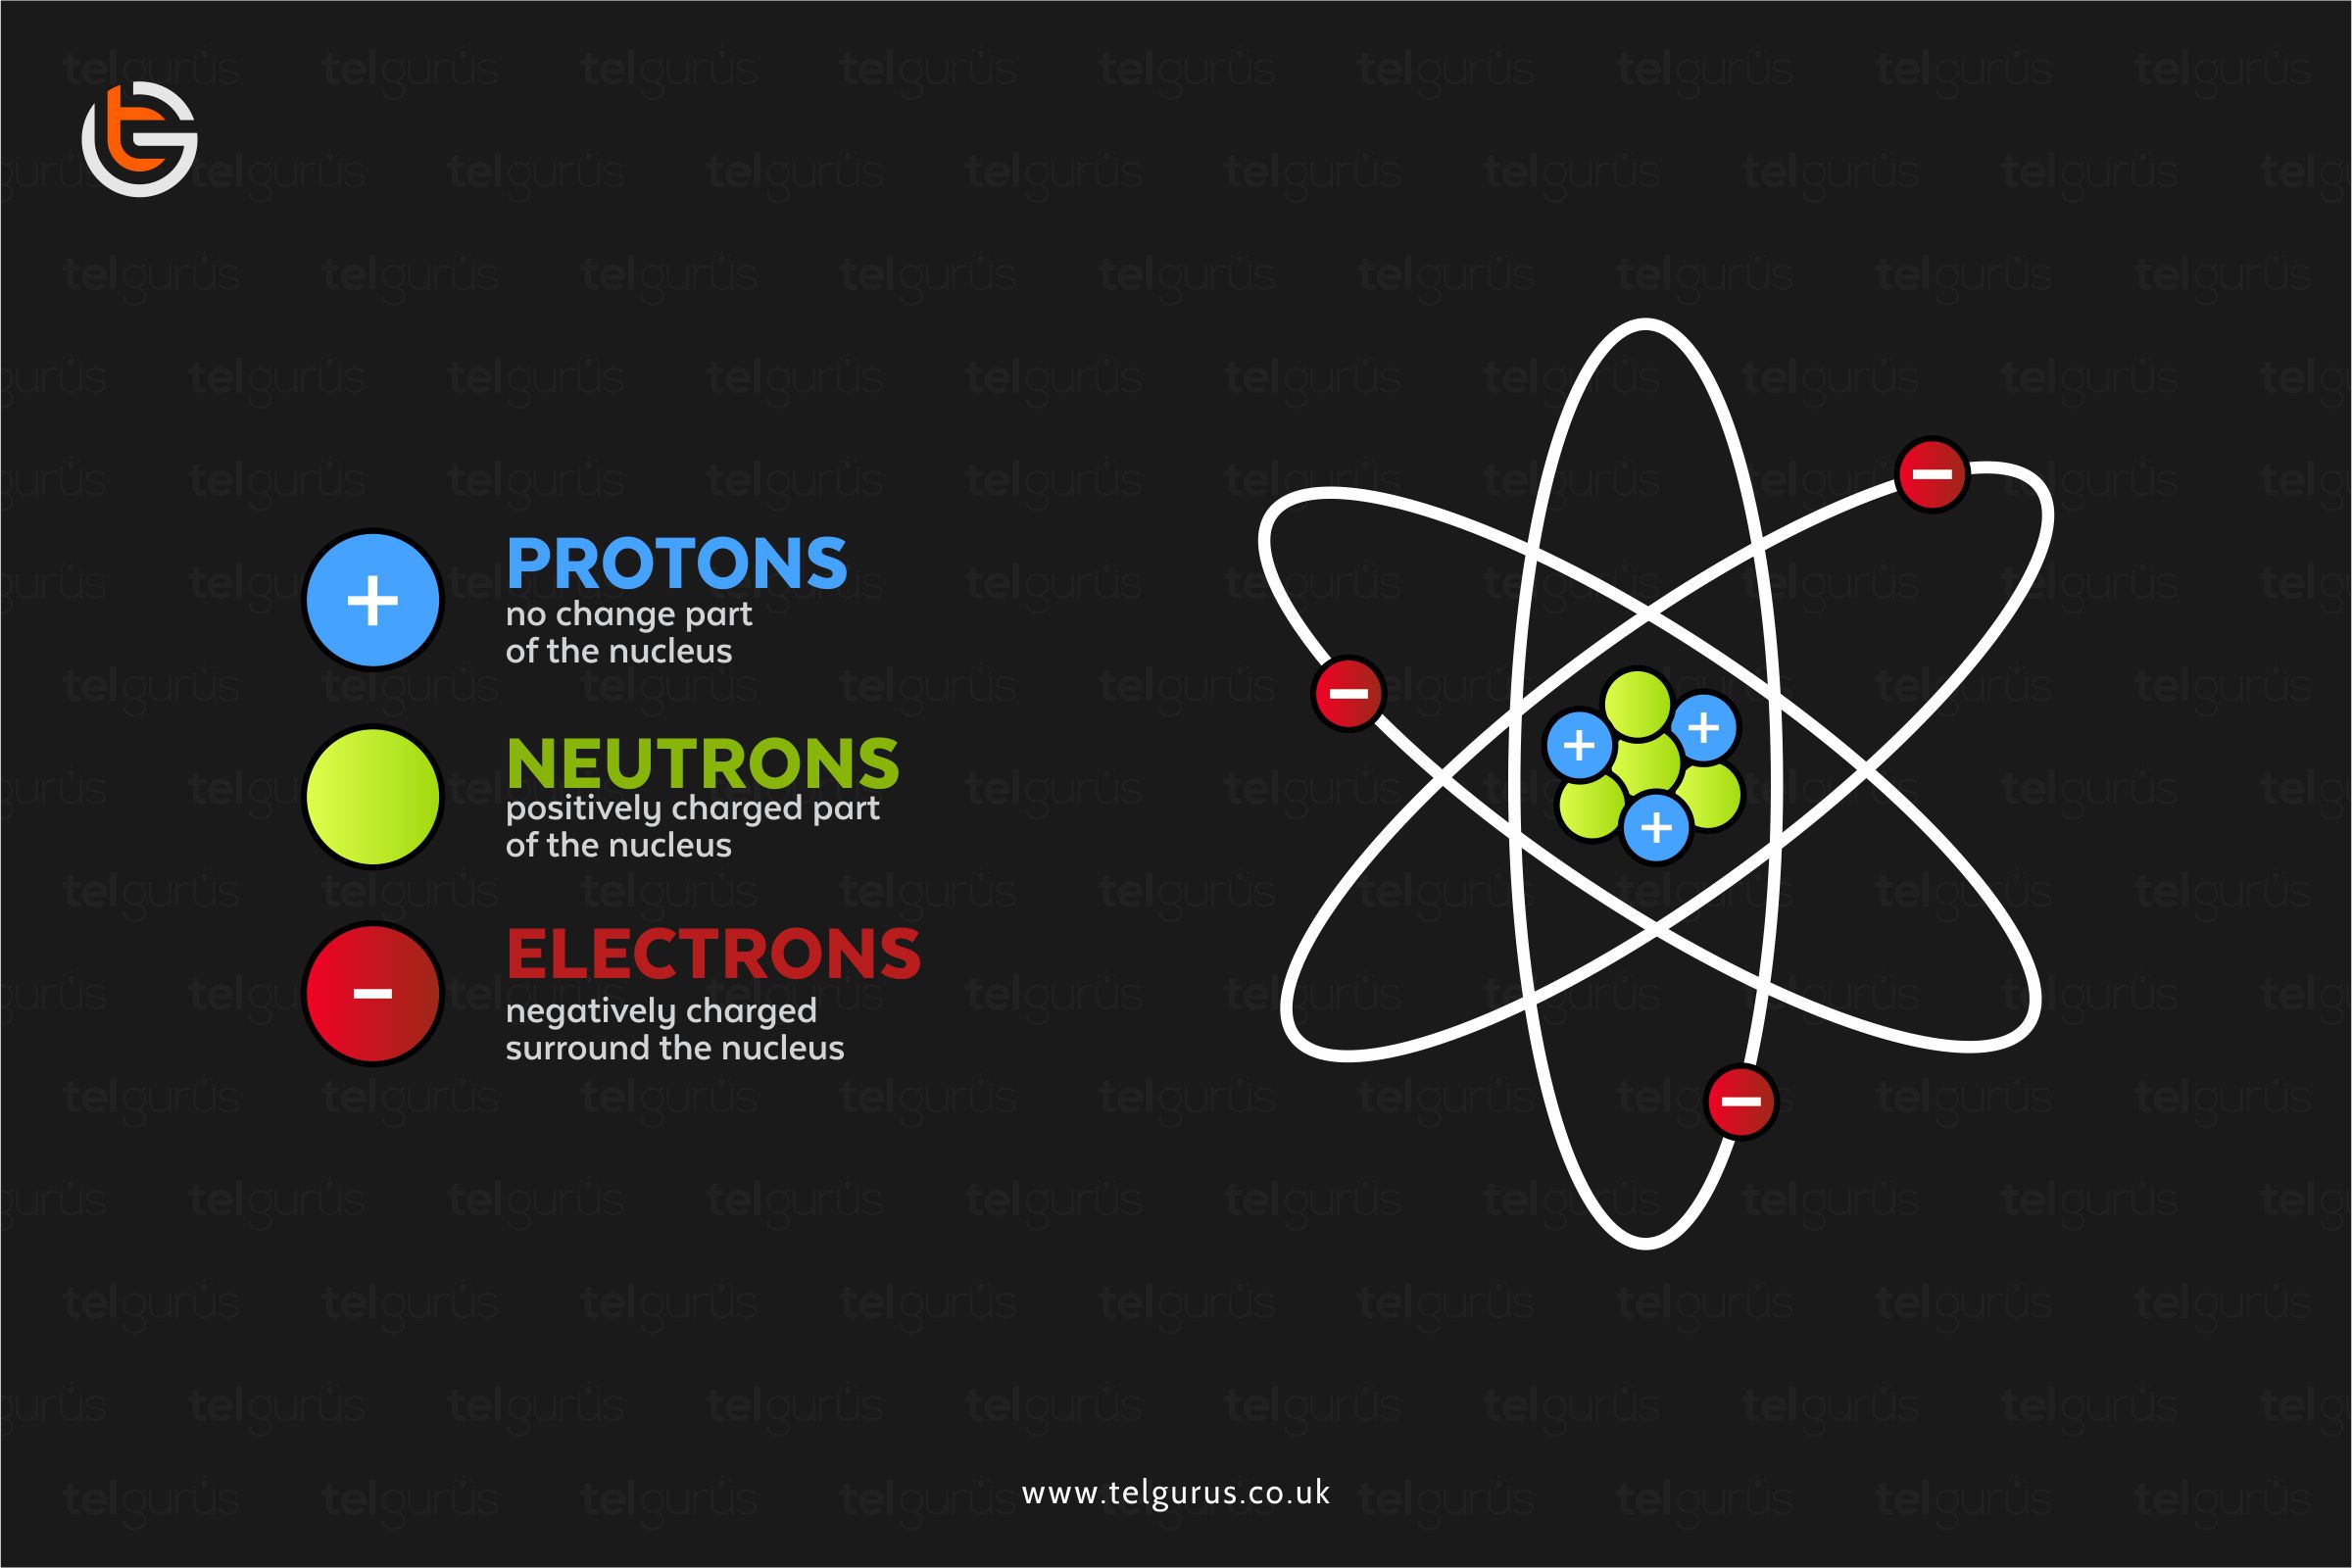 What is the overall charge of the nucleus of an atom, and why?